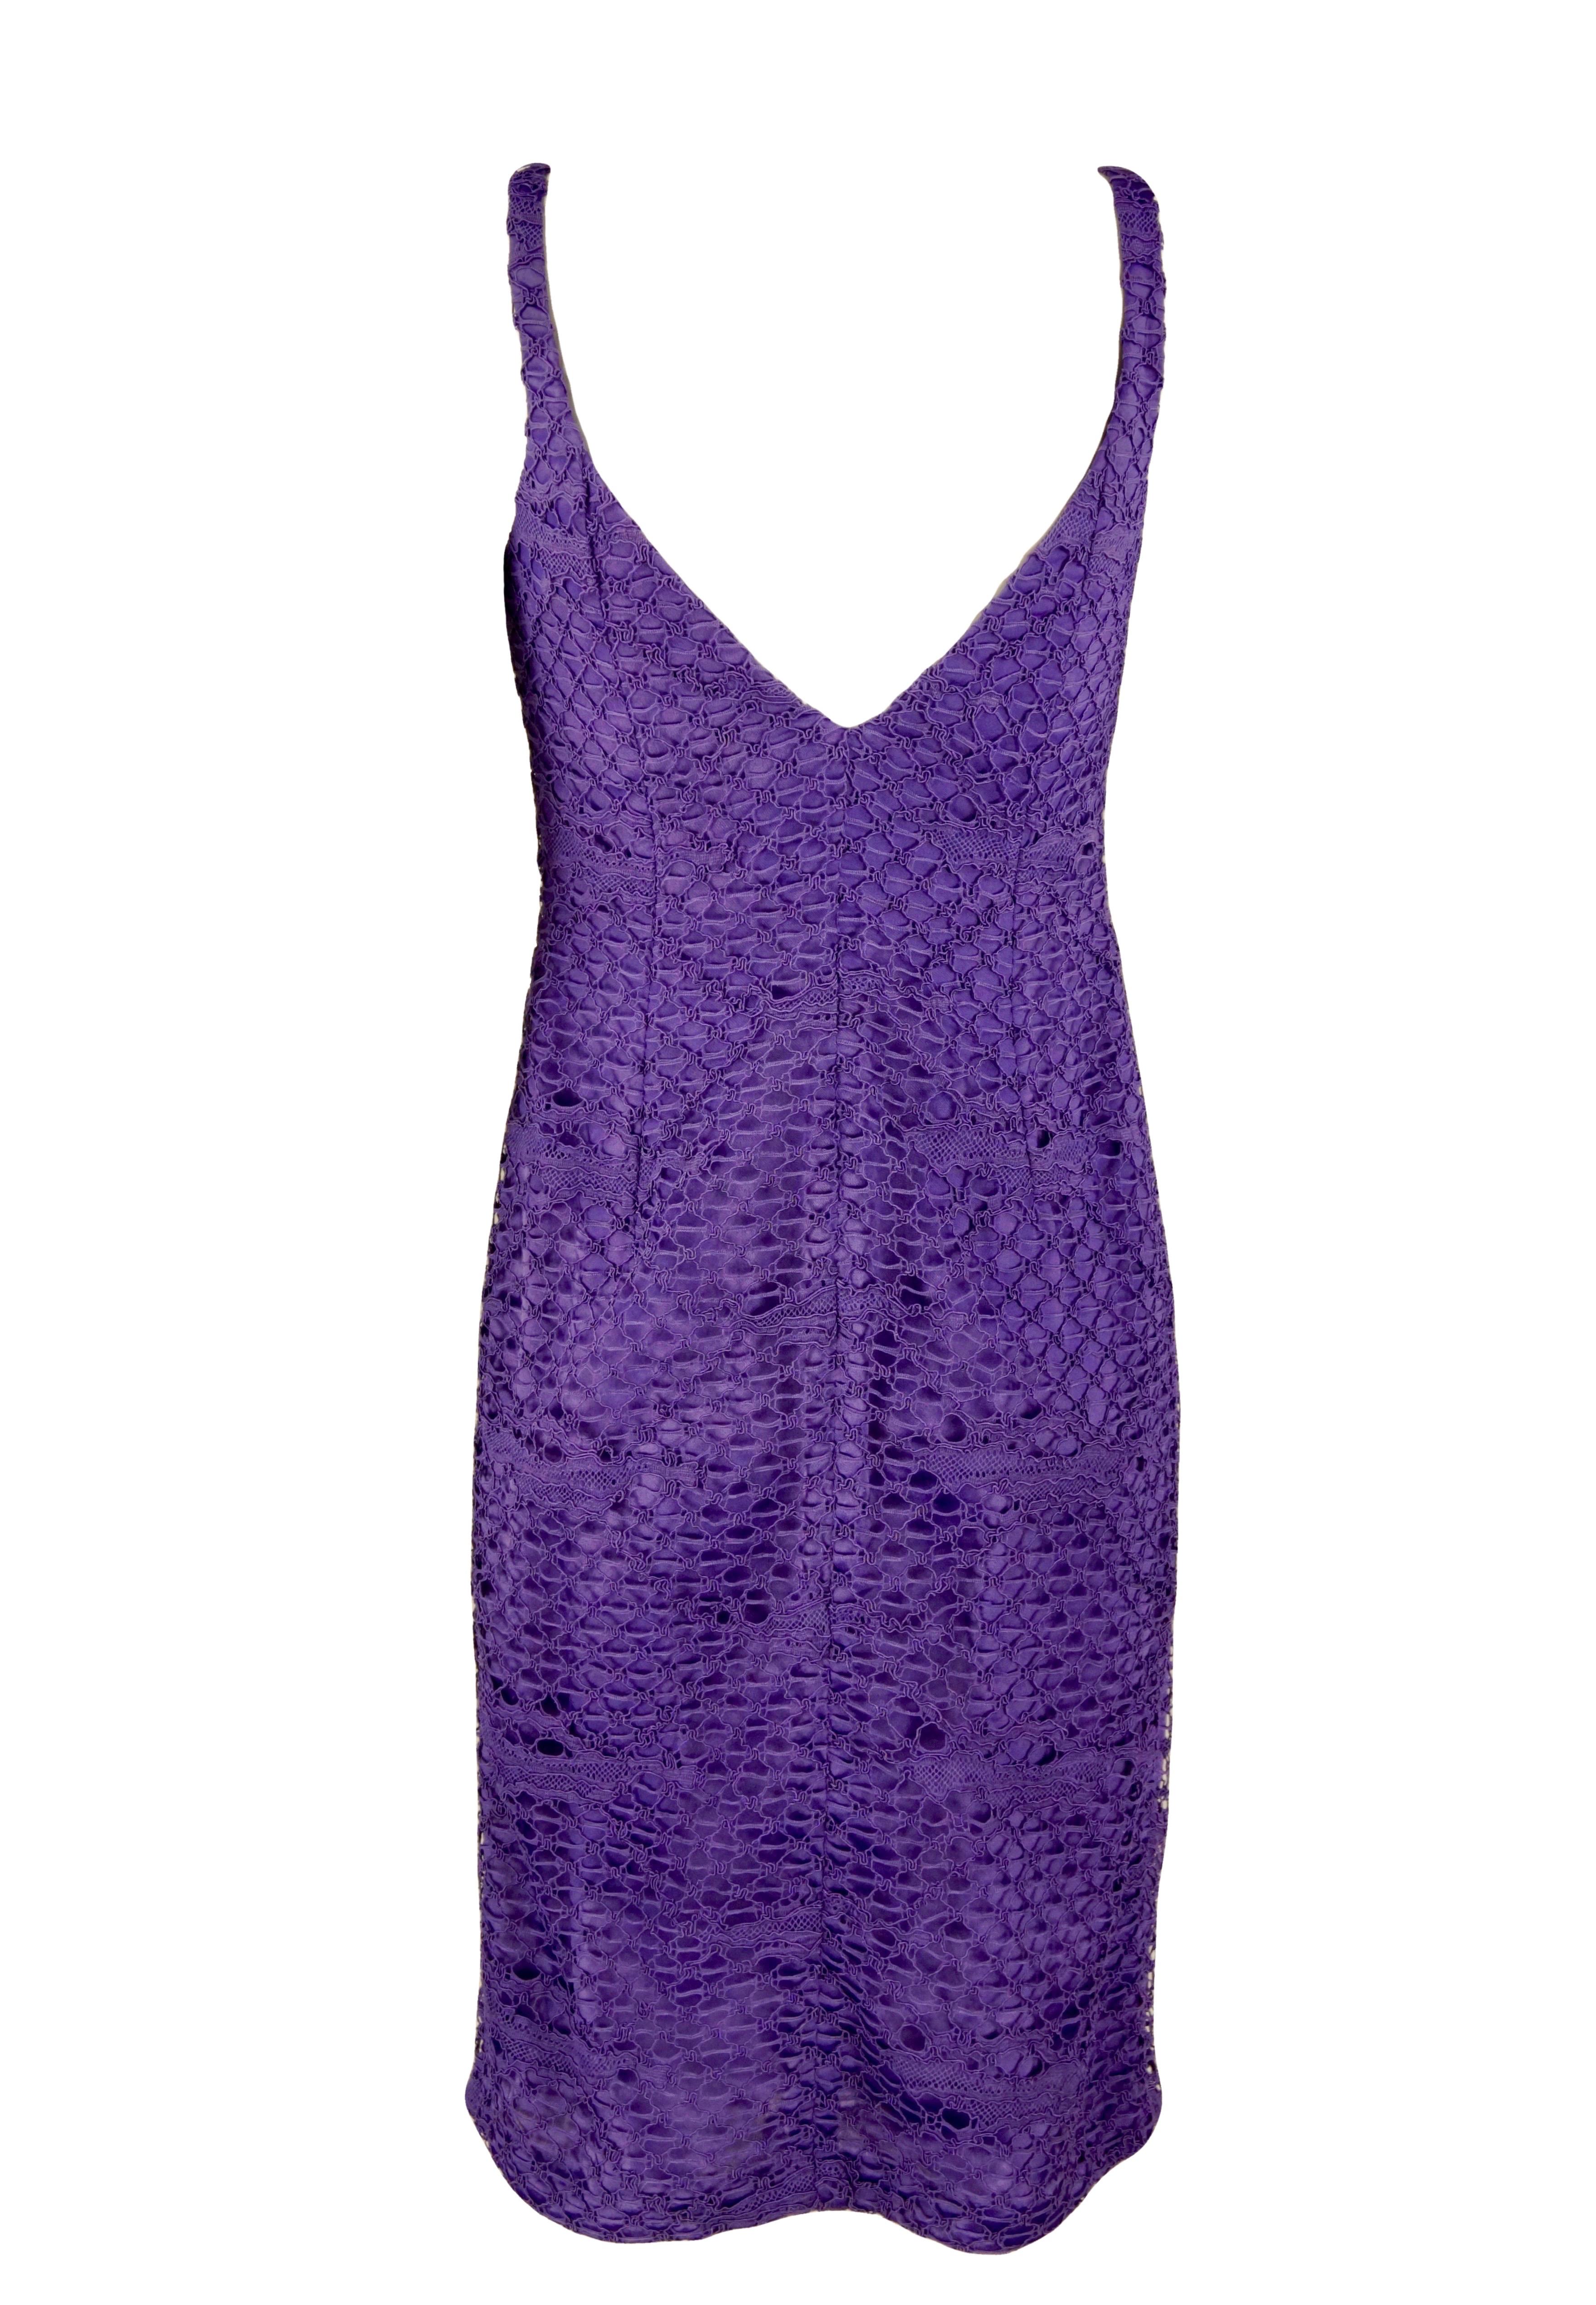 Gianni Versace Couture purple lace dress For Sale 3